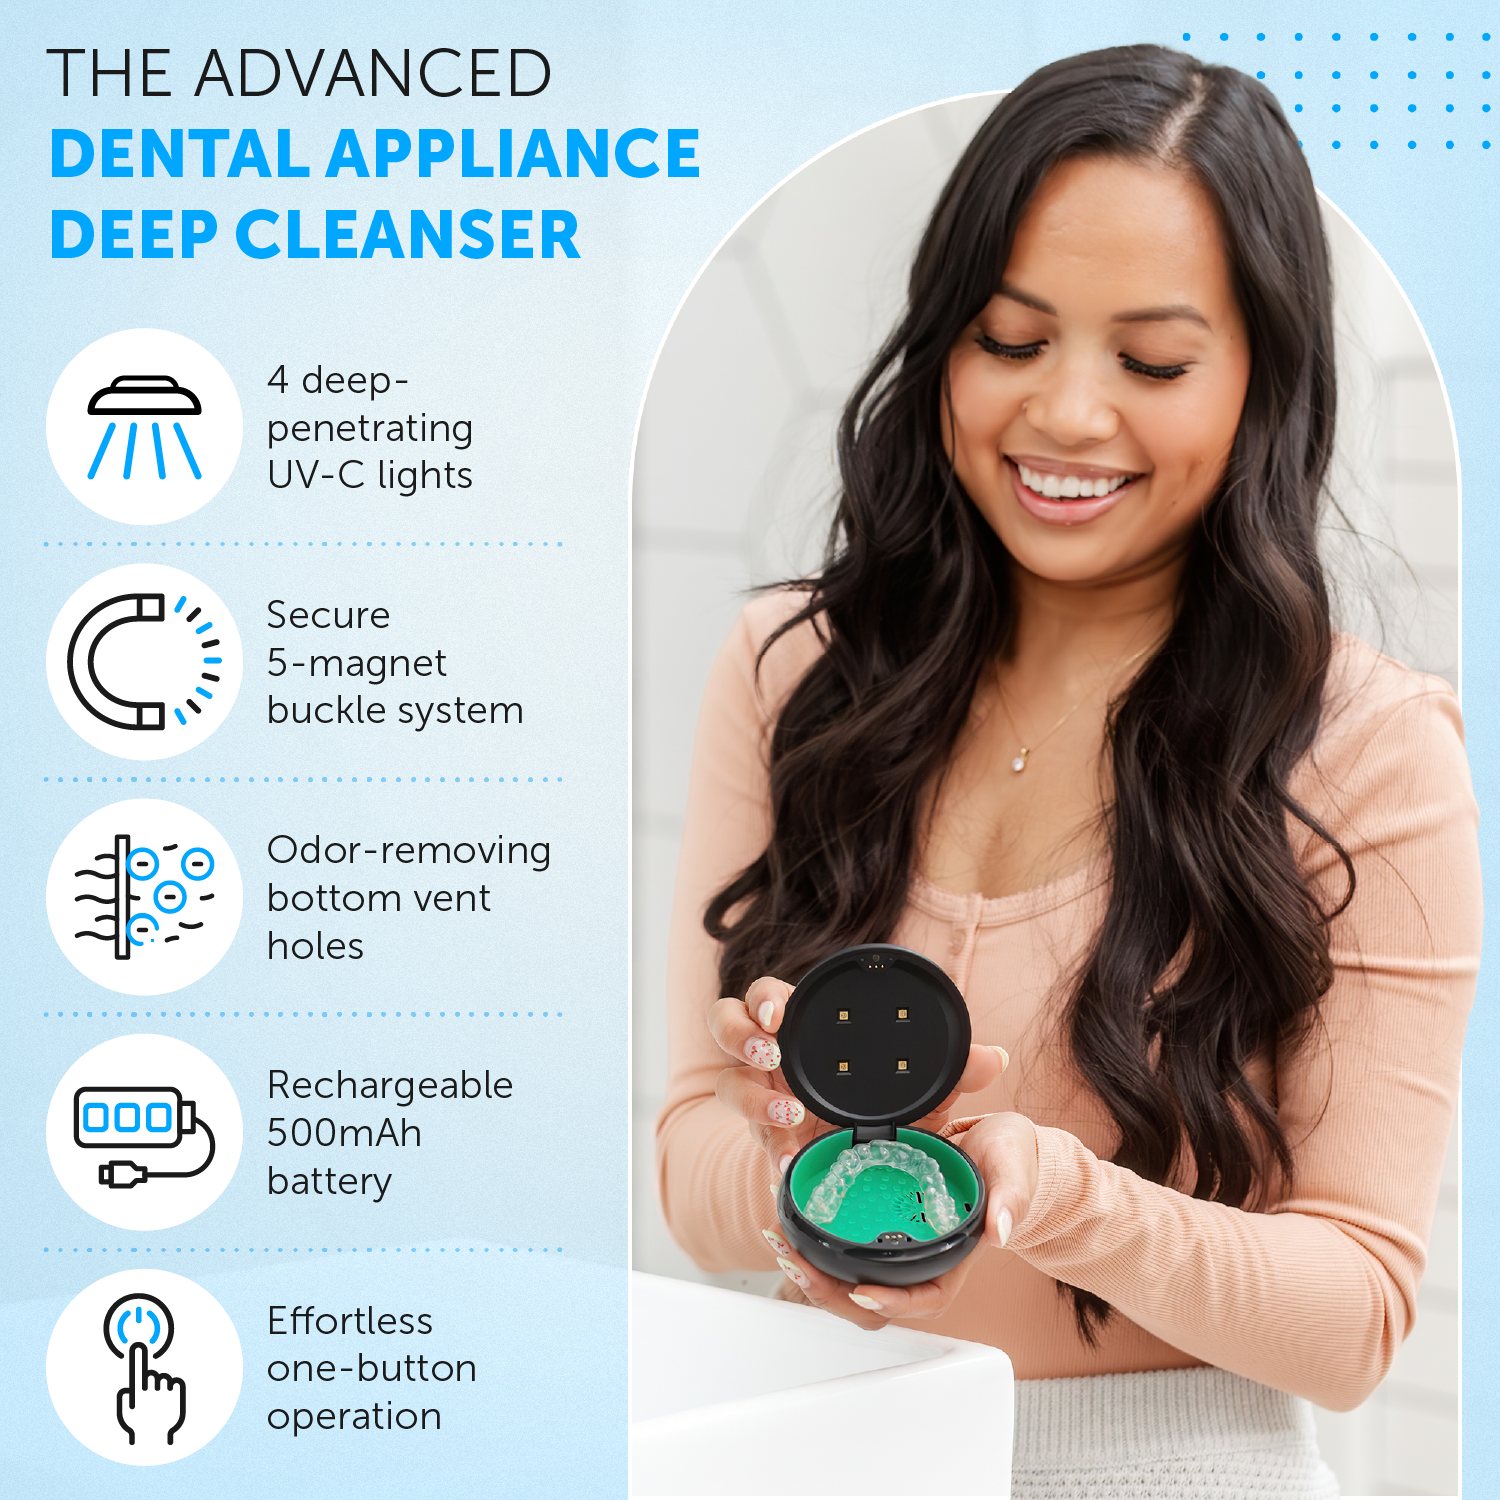 NuraClean UV-C Dental Appliance Cleaner - UV Retainer Cleaning Machine Also Great for Deep Cleansing Aligner, Mouth Guard, Night Guard, Dentures in Just 3 Minutes - Portable Dental Guard Cleaner Case